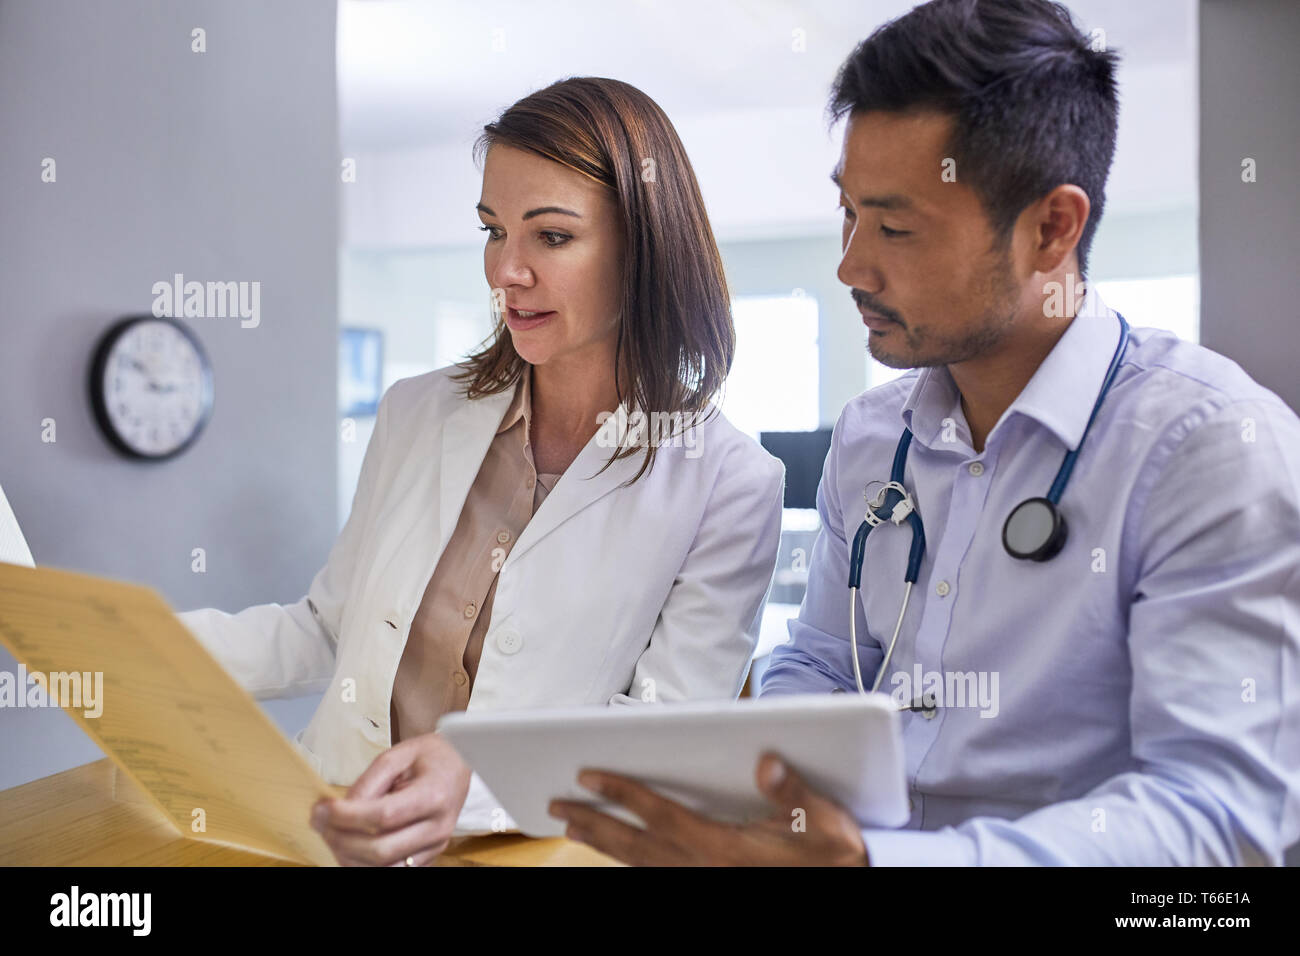 Doctors discussing medical record in clinic Stock Photo